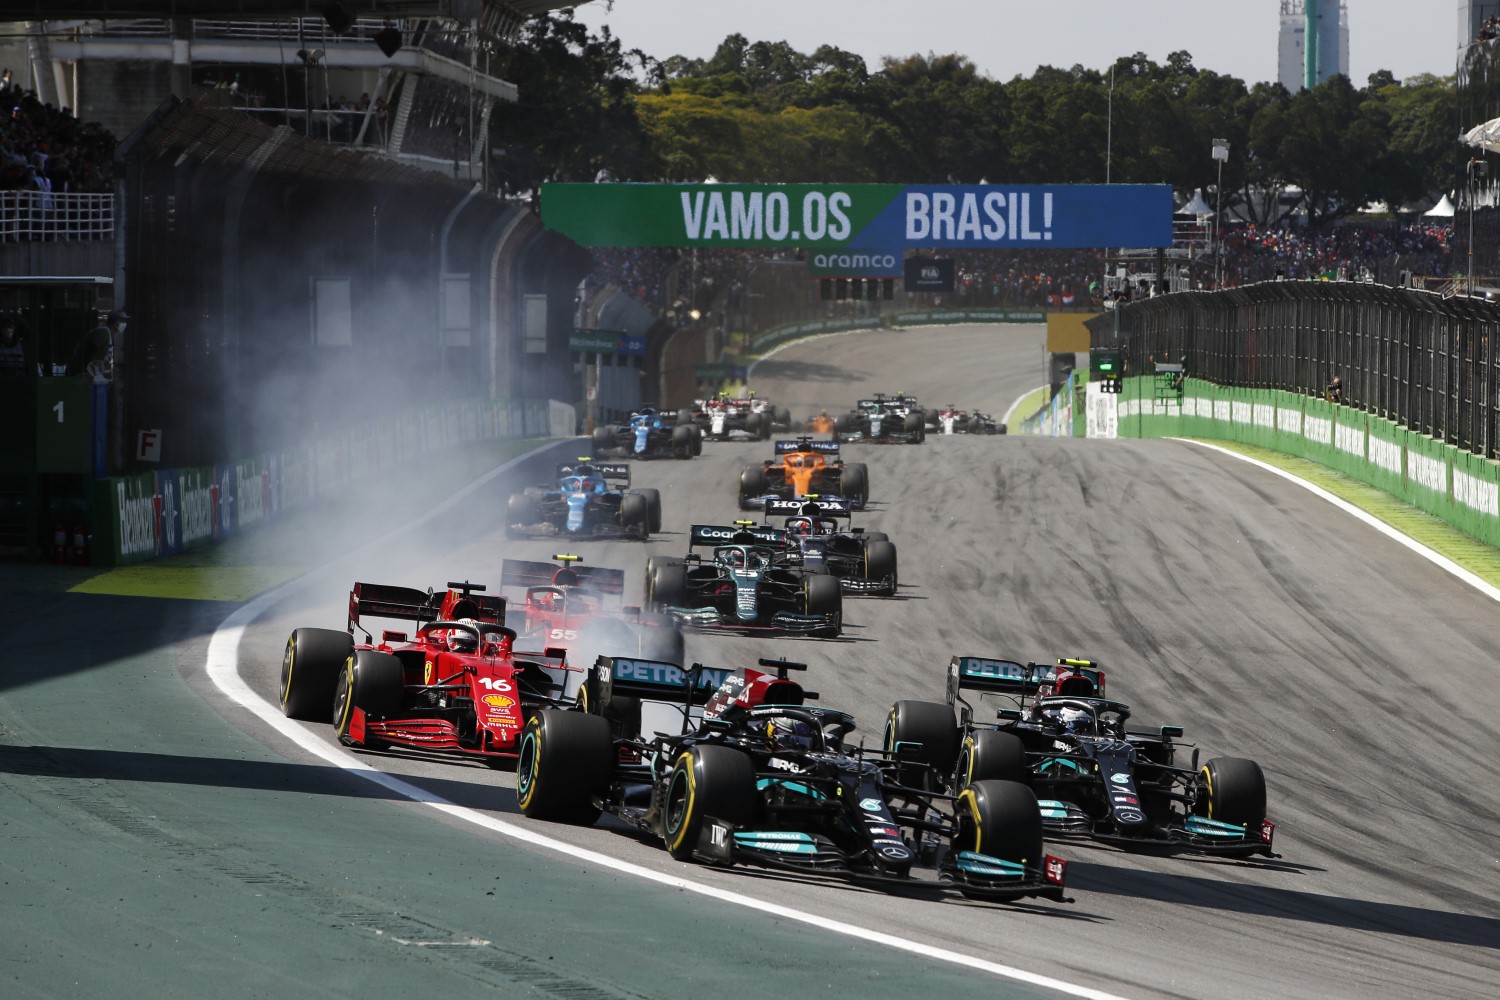 2021 In Brazil both Mercedes passed the Ferraris on the straights like they were parked. - LAT Images